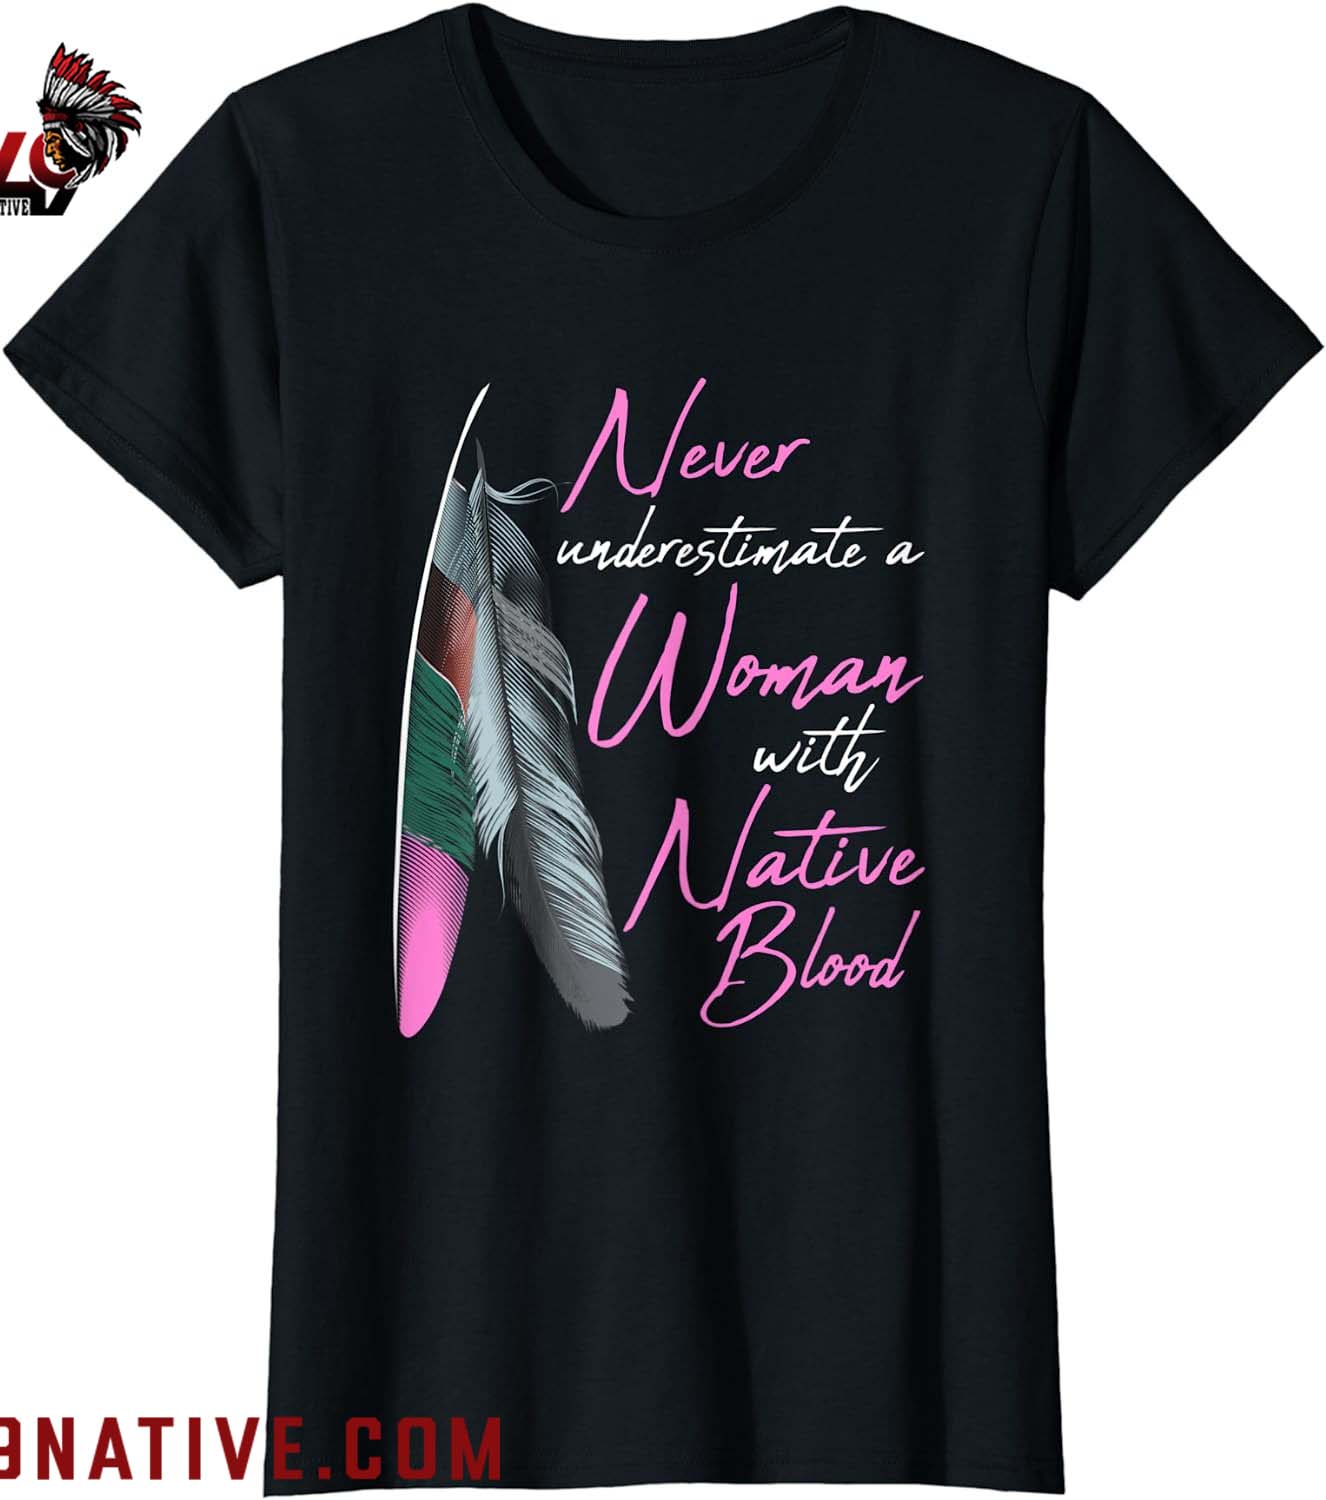 Native American Indian A Woman With Native Blood T Shirt - 49native.com